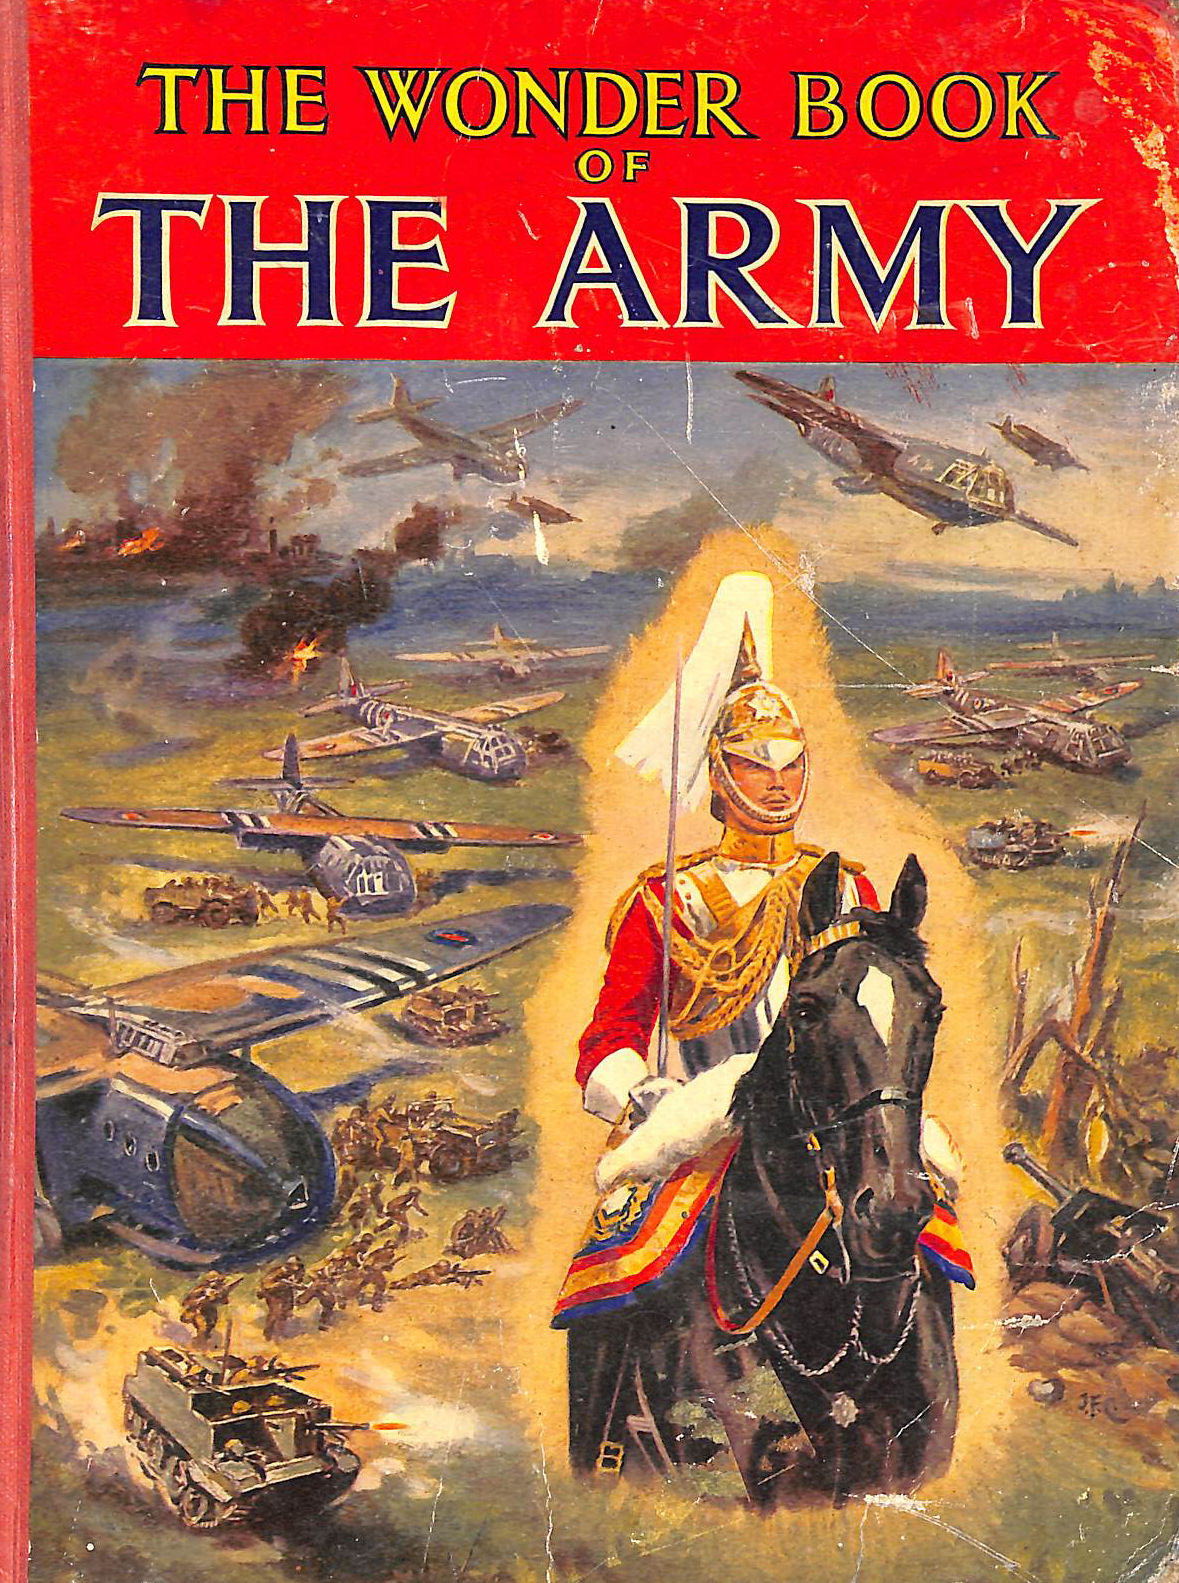 FIELD MARSHAL VISCOUNT MONTGOMERY OF ALAMEIN (FOREWORD) - The Wonder Book of the Army